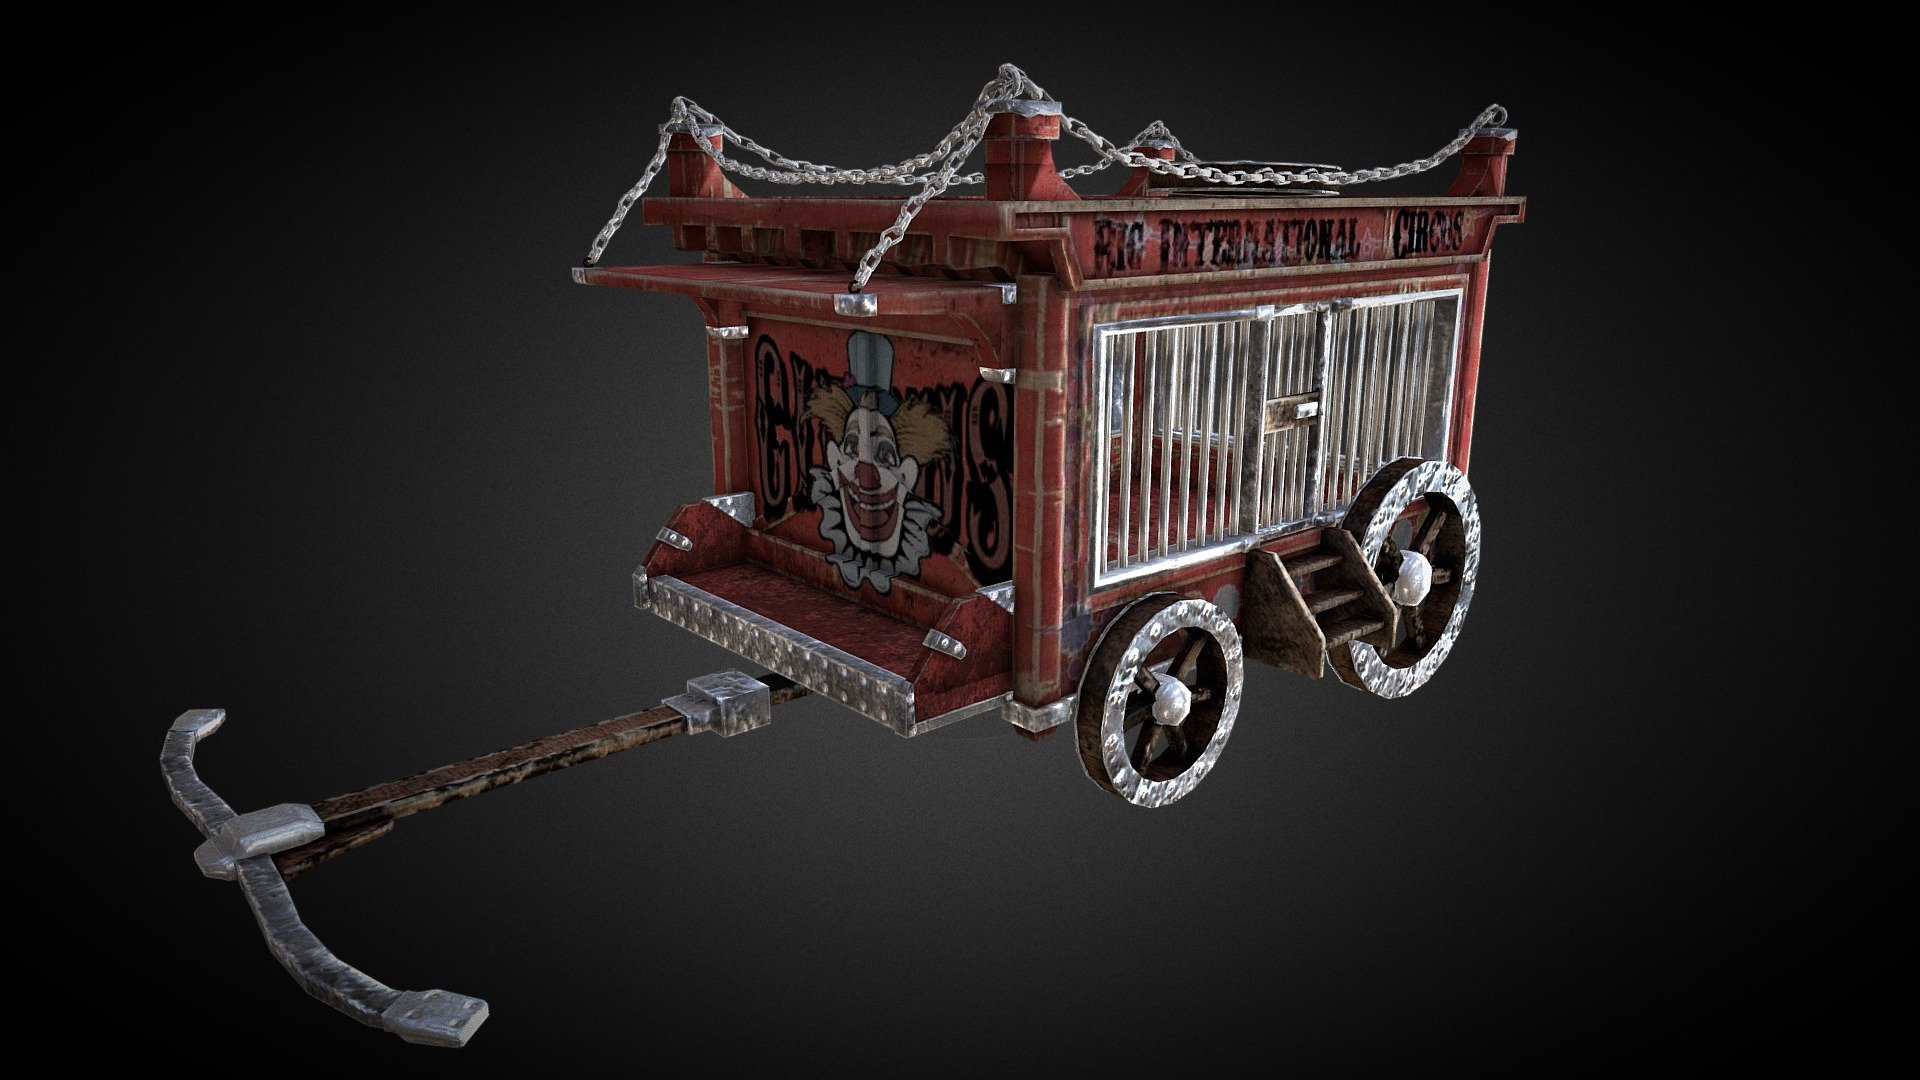 This is a Circus cage made using Maya and Substance Painter 3d model